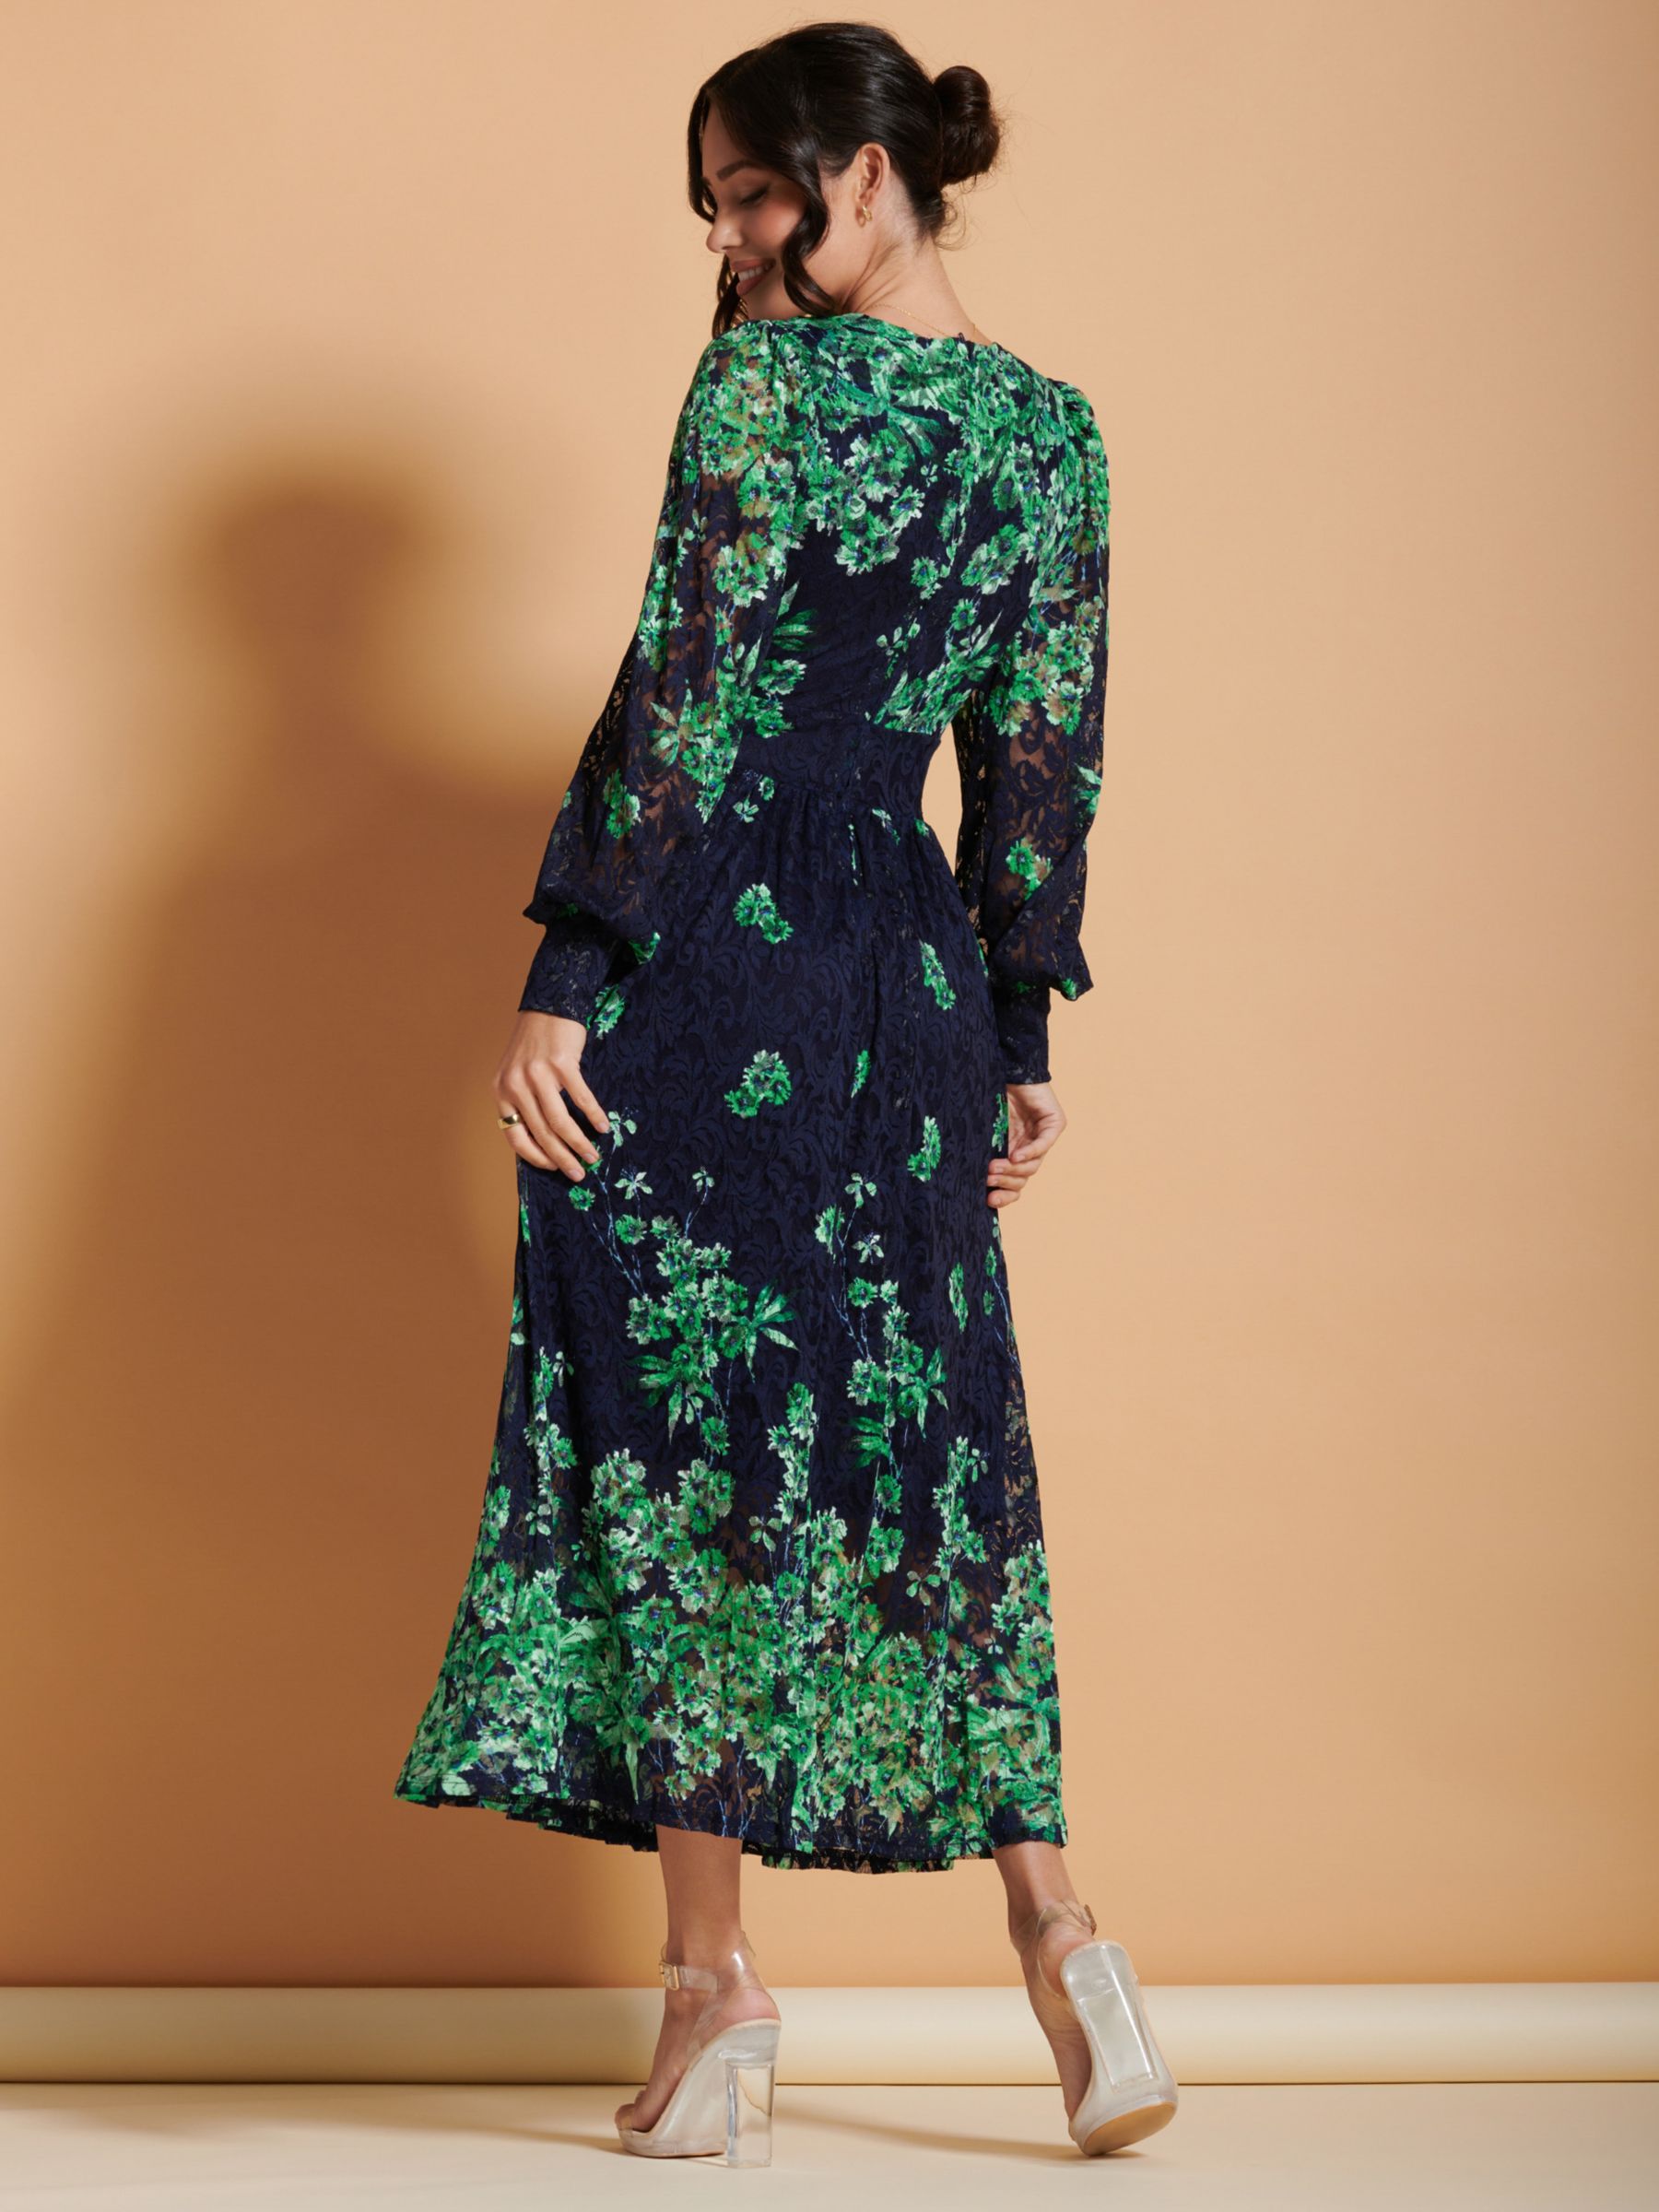 Jolie Moi Amica Lace Floral Maxi Dress, Green/Multi at John Lewis ...